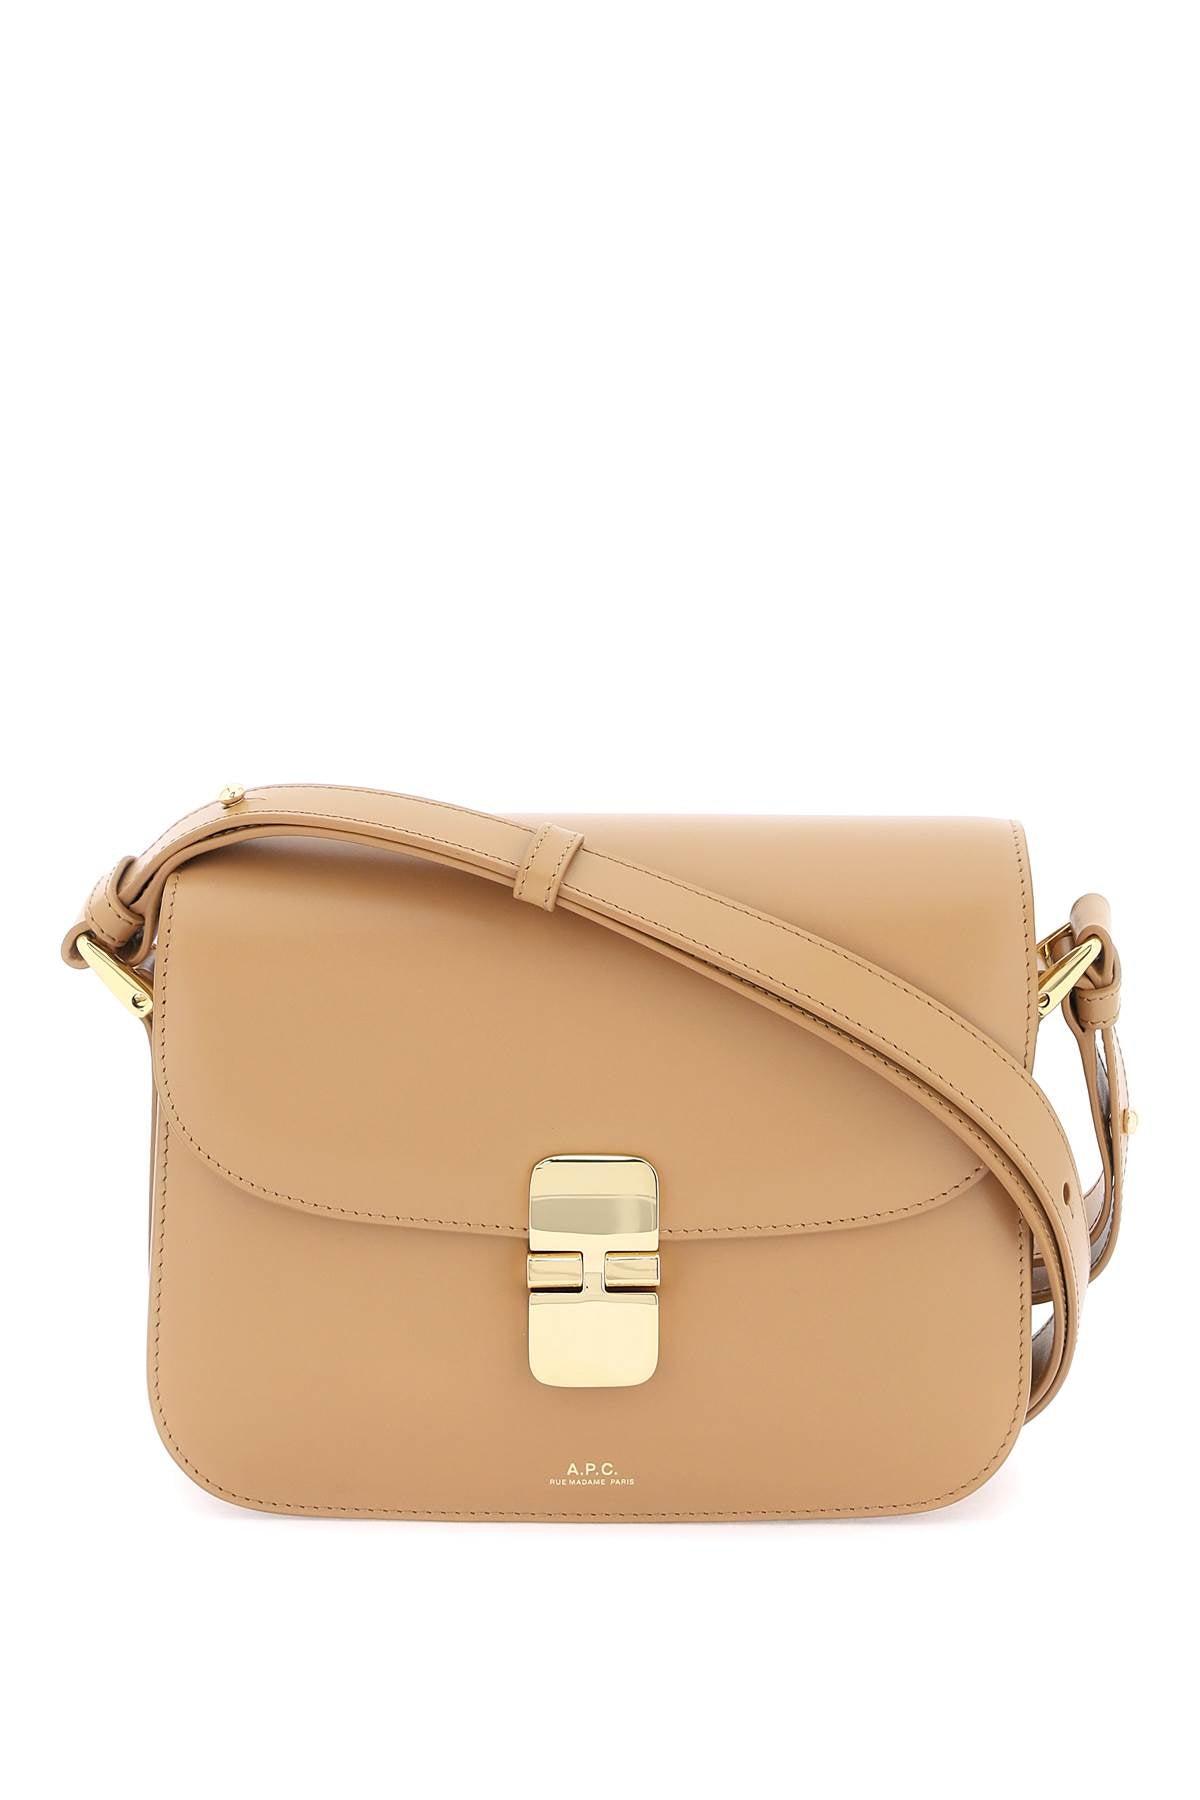 A.P.C. Grace Small Brown Smooth Leather Crossbody Bag with Gold-Tone Accents